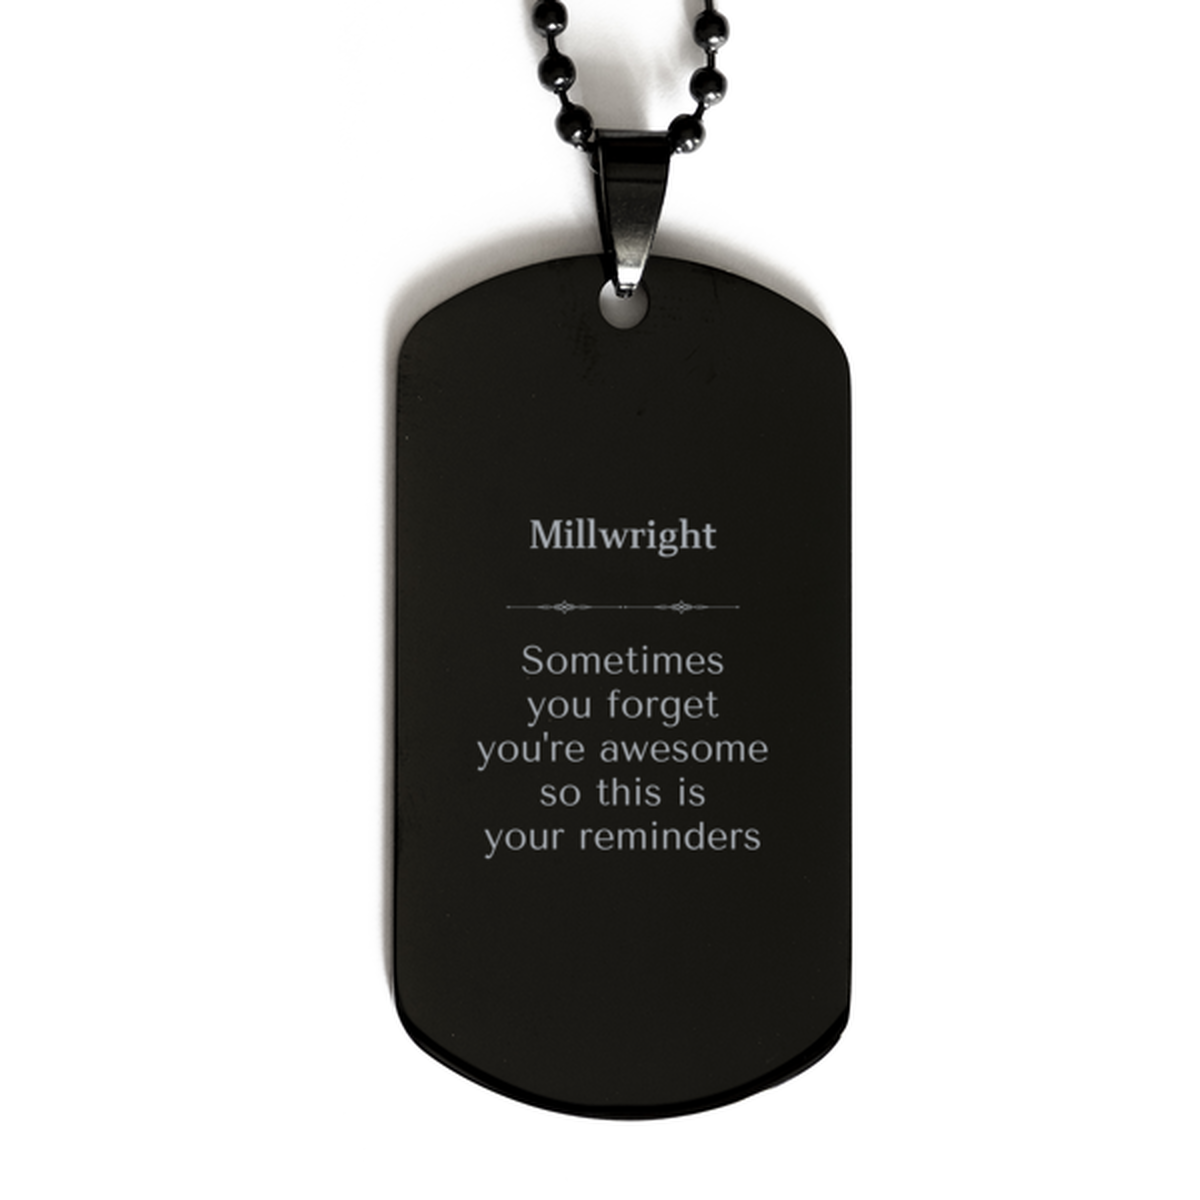 Sentimental Millwright Black Dog Tag, Millwright Sometimes you forget you're awesome so this is your reminders, Graduation Christmas Birthday Gifts for Millwright, Men, Women, Coworkers